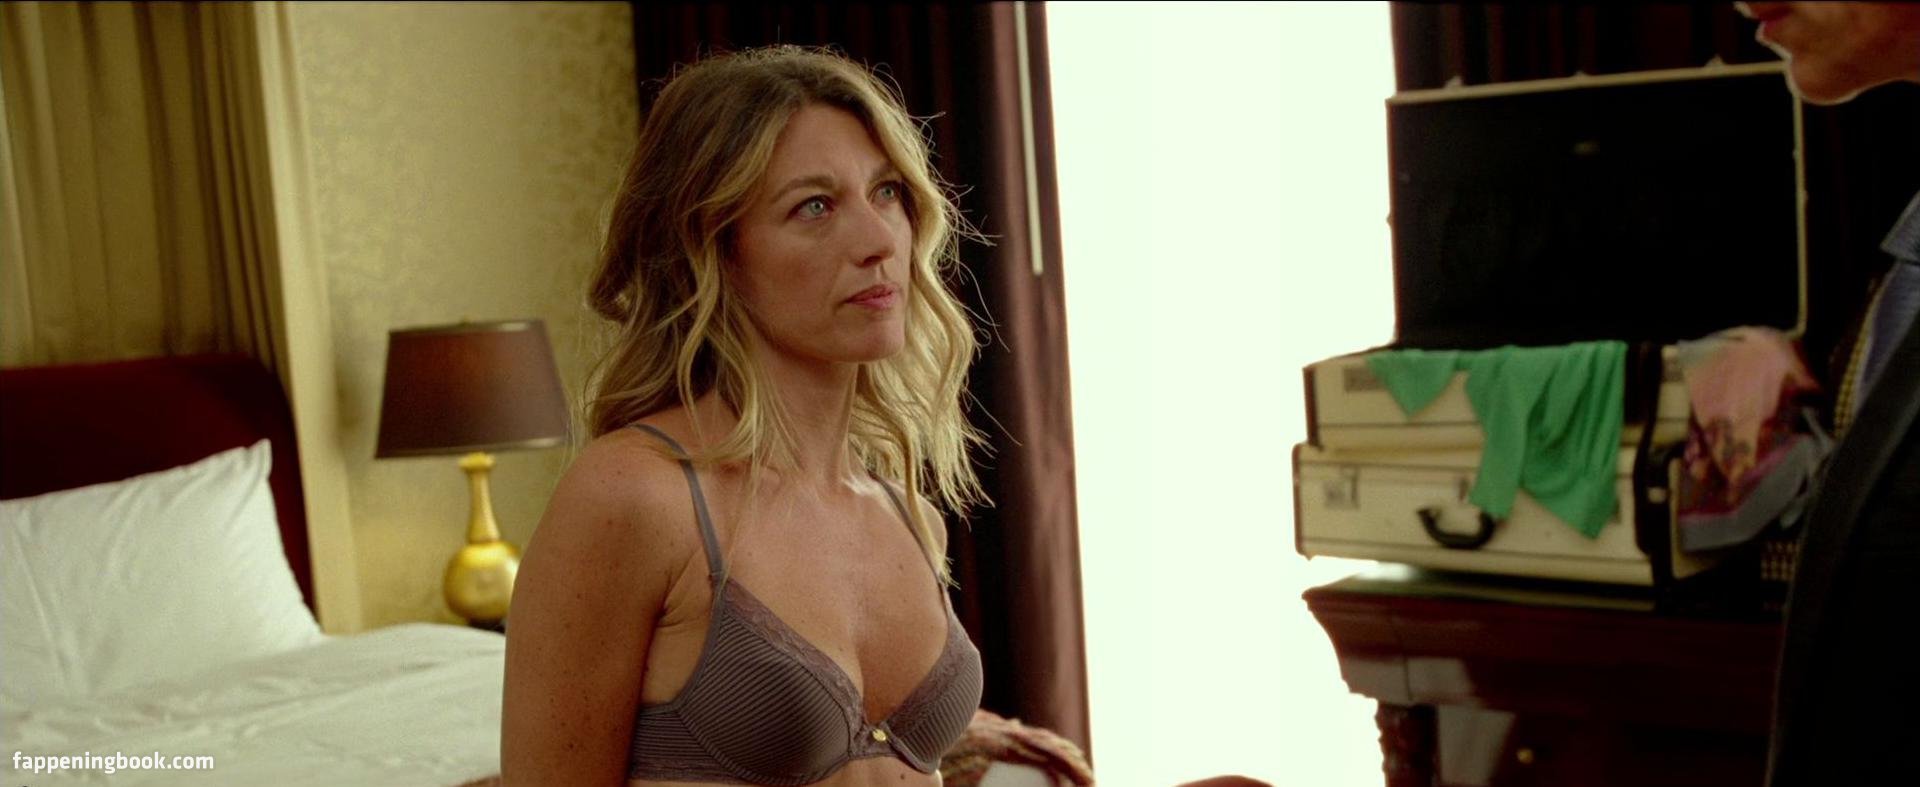 Natalie Zea Nude, The Fappening - Photo #409268 - FappeningBook.